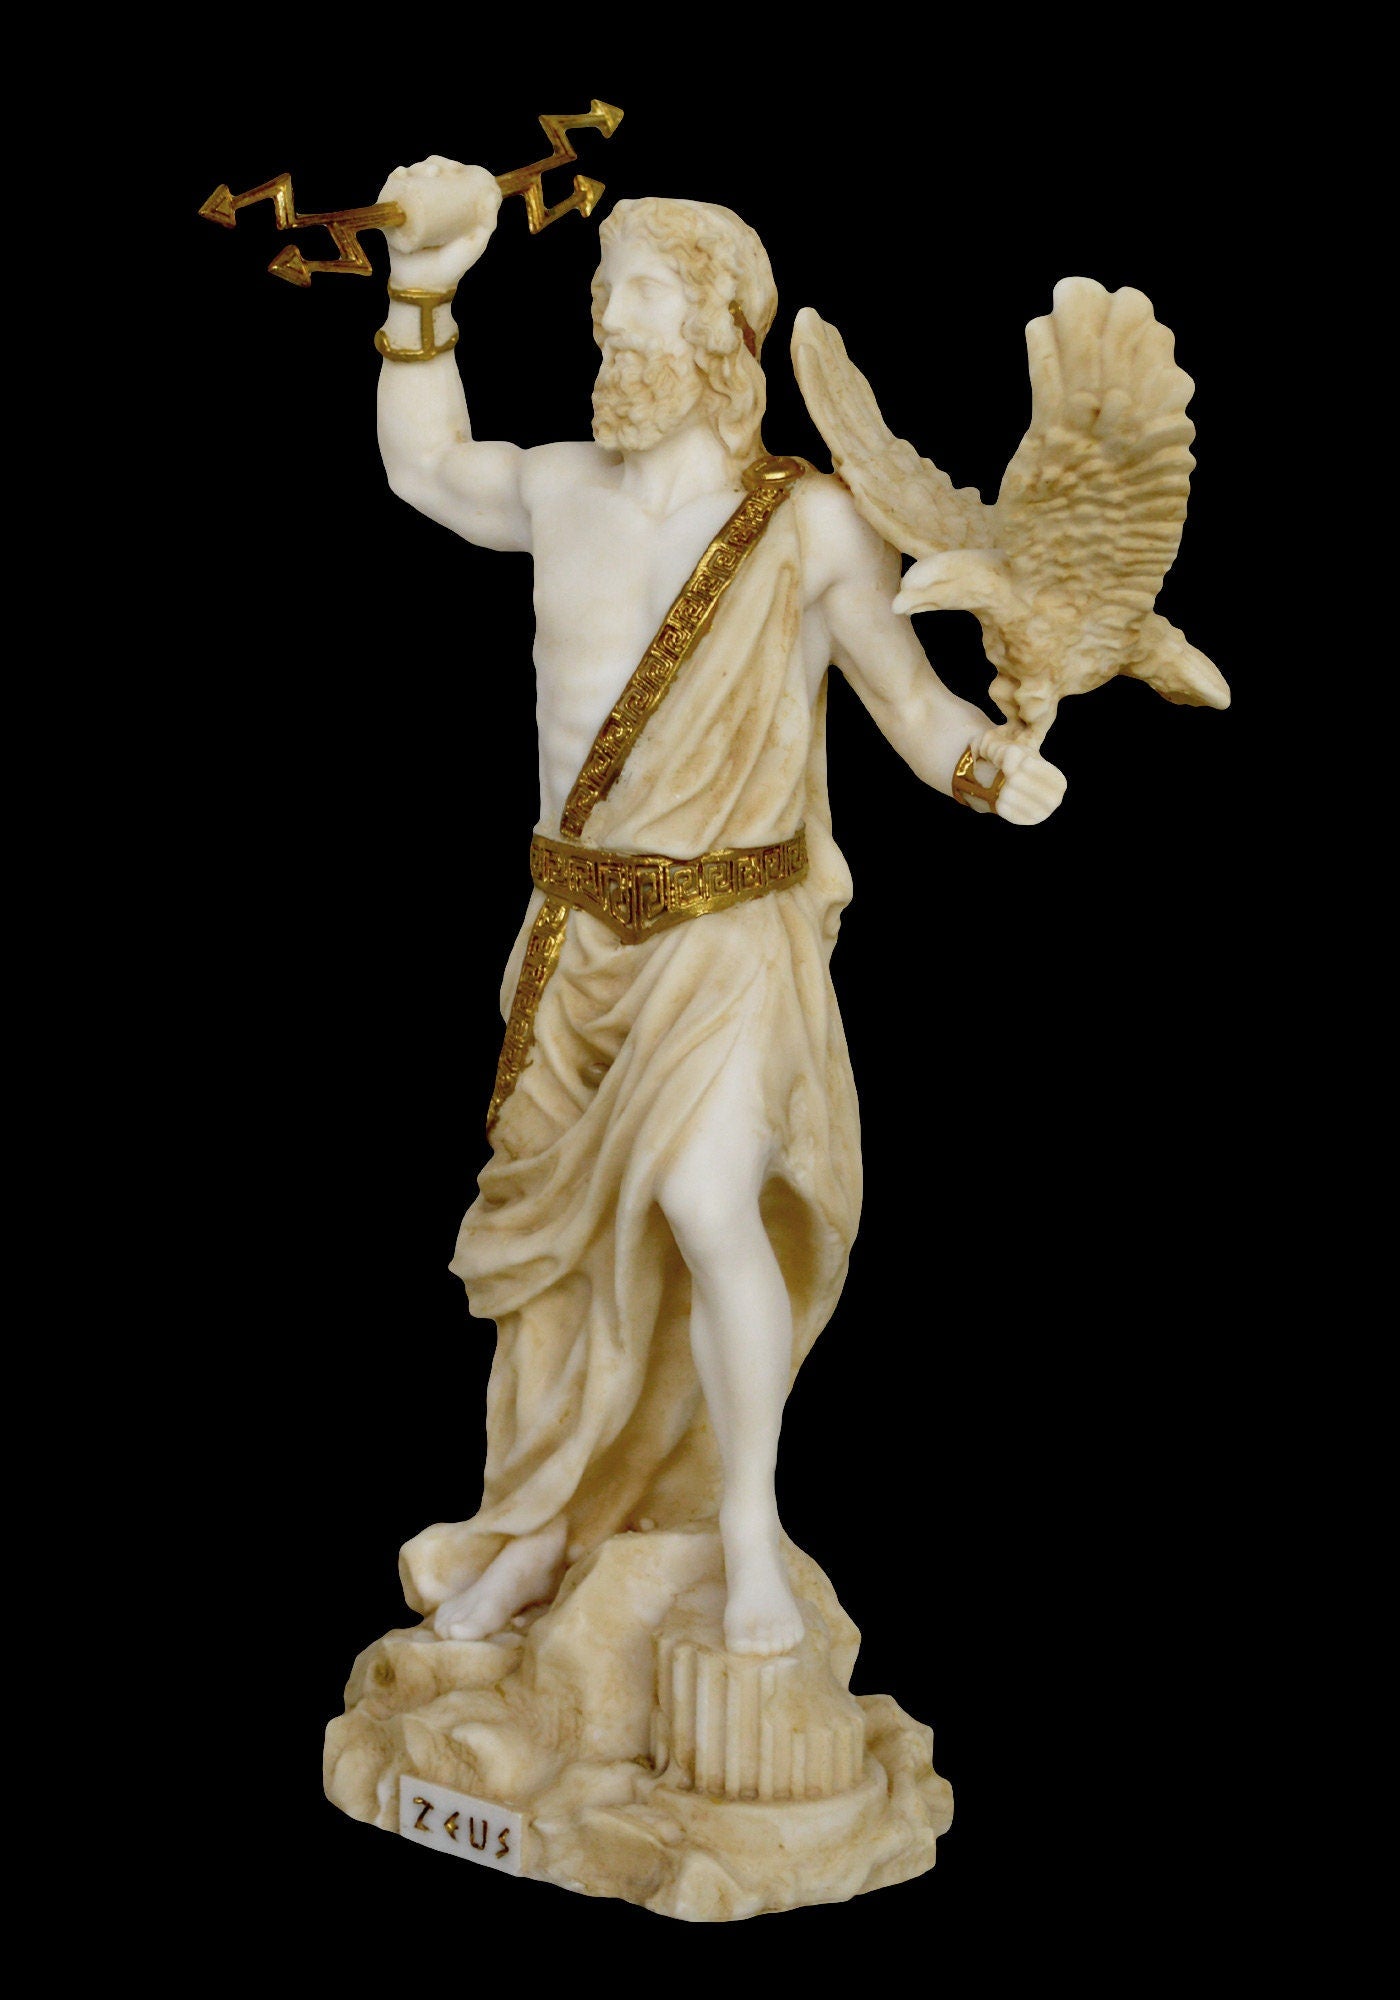 Zeus Jupiter - Greek Roman God of the Sky, Law and Order, Destiny and Fate - King of the Gods of Mount Olympus - Alabaster Aged Statue